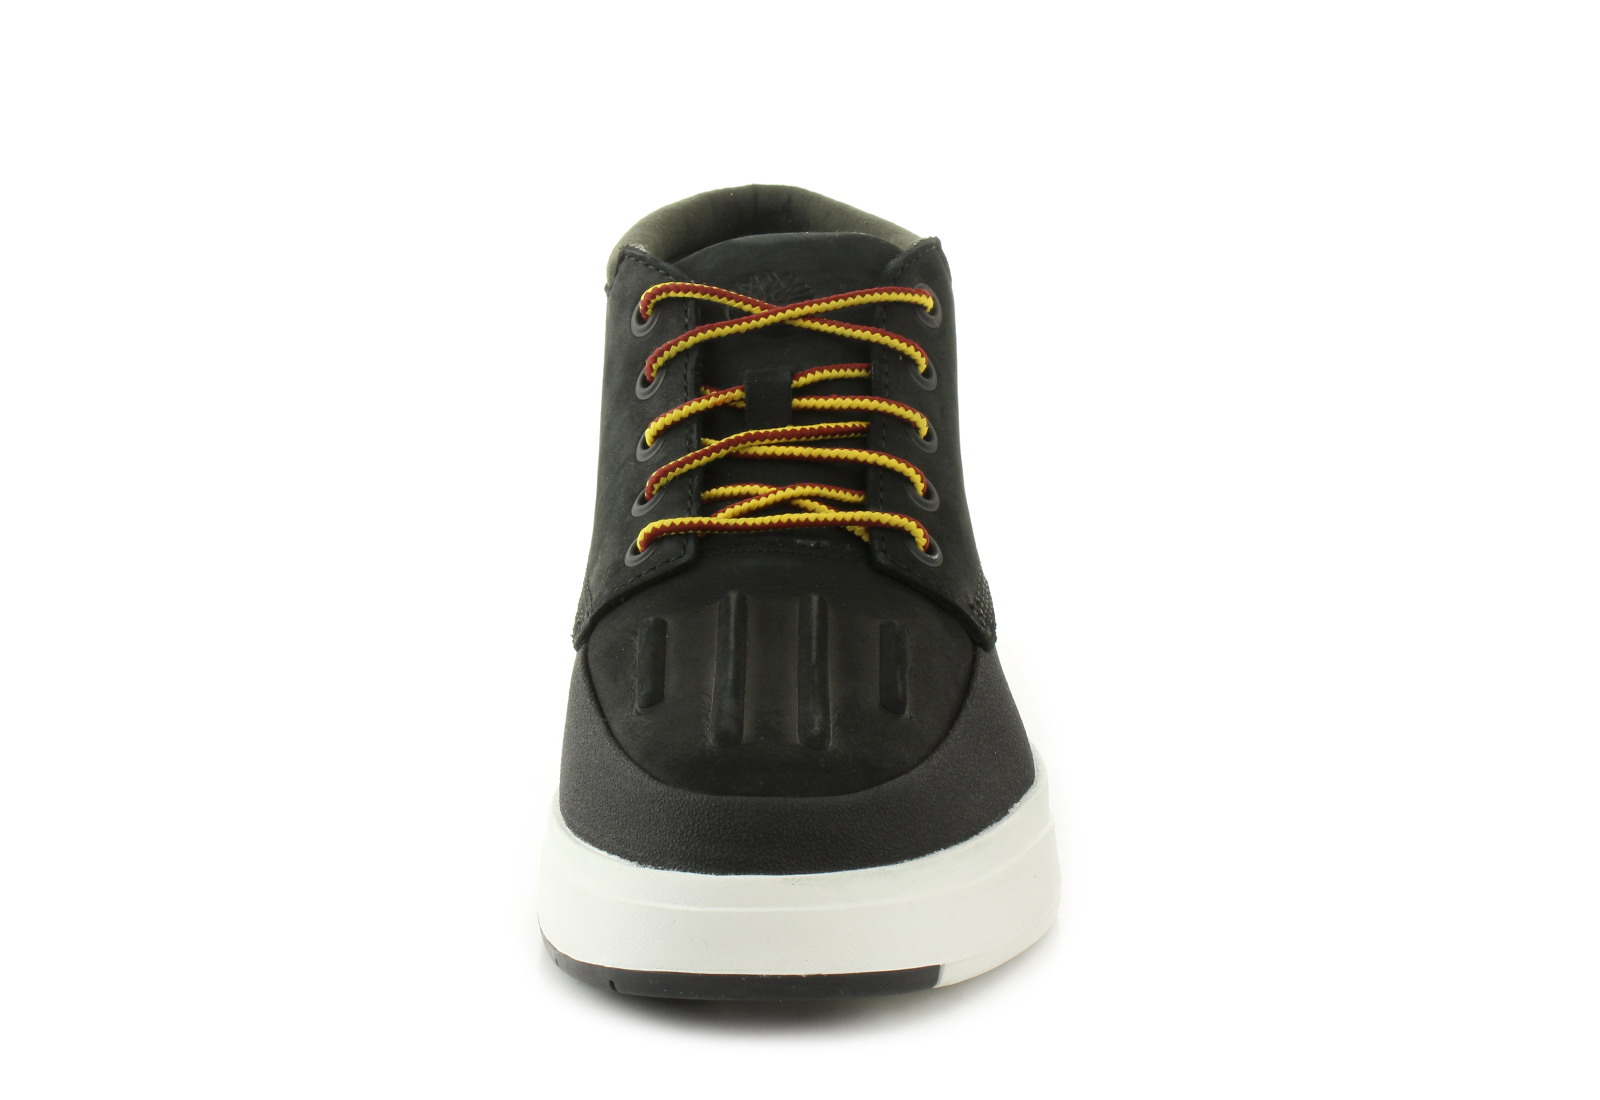 Timberland Topánky David Square Sneakers